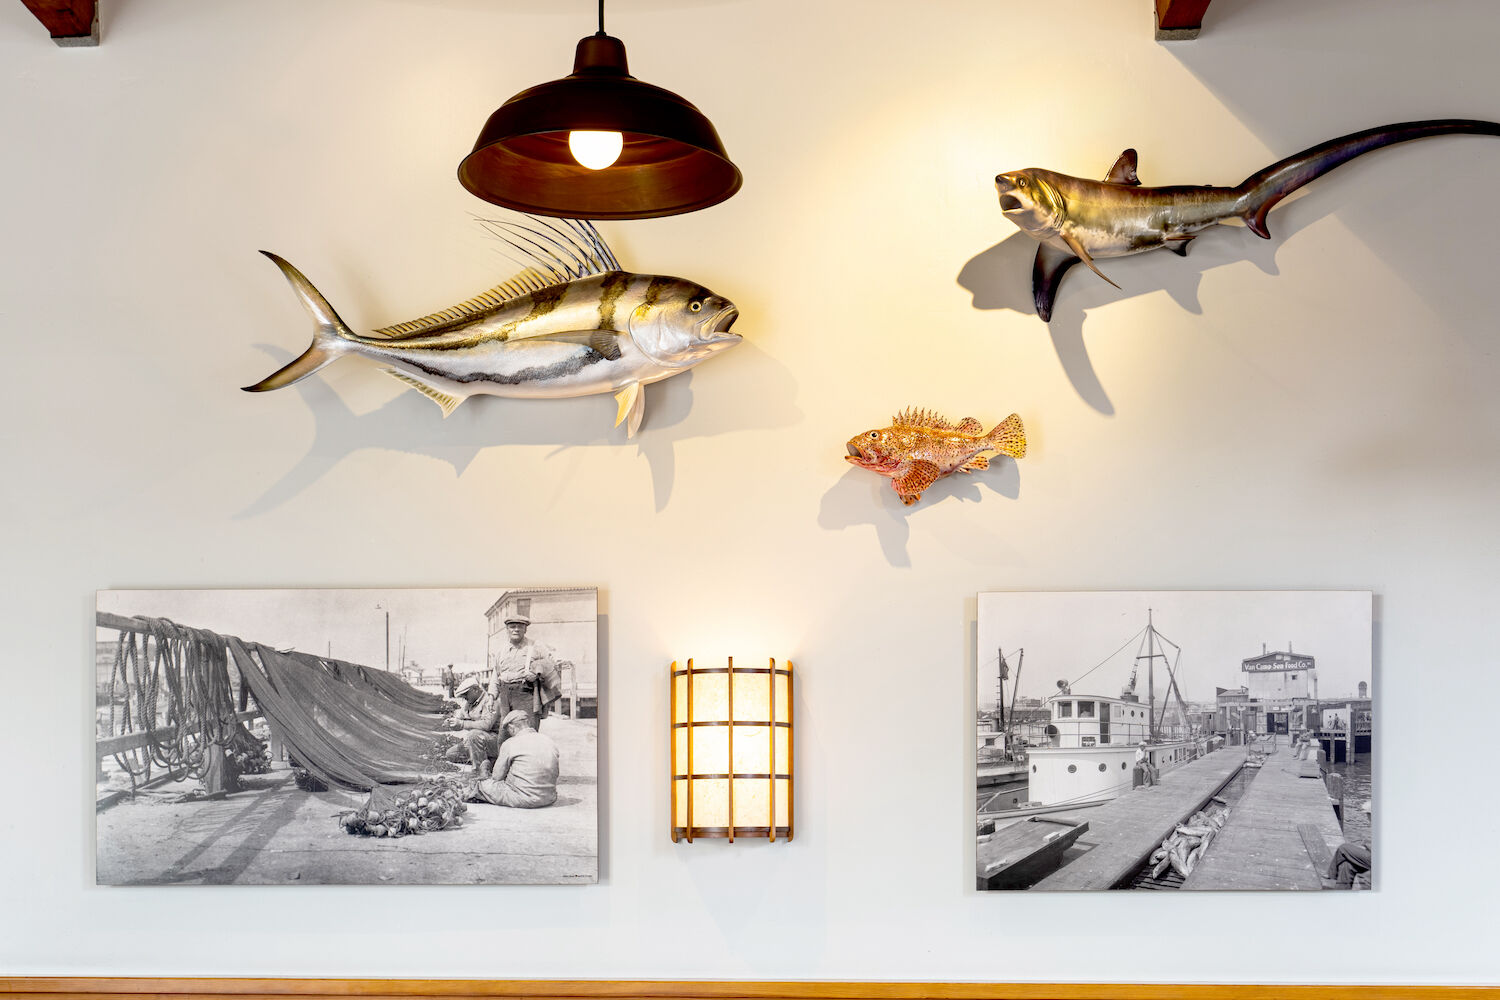 the fishery, wall fish and pictures